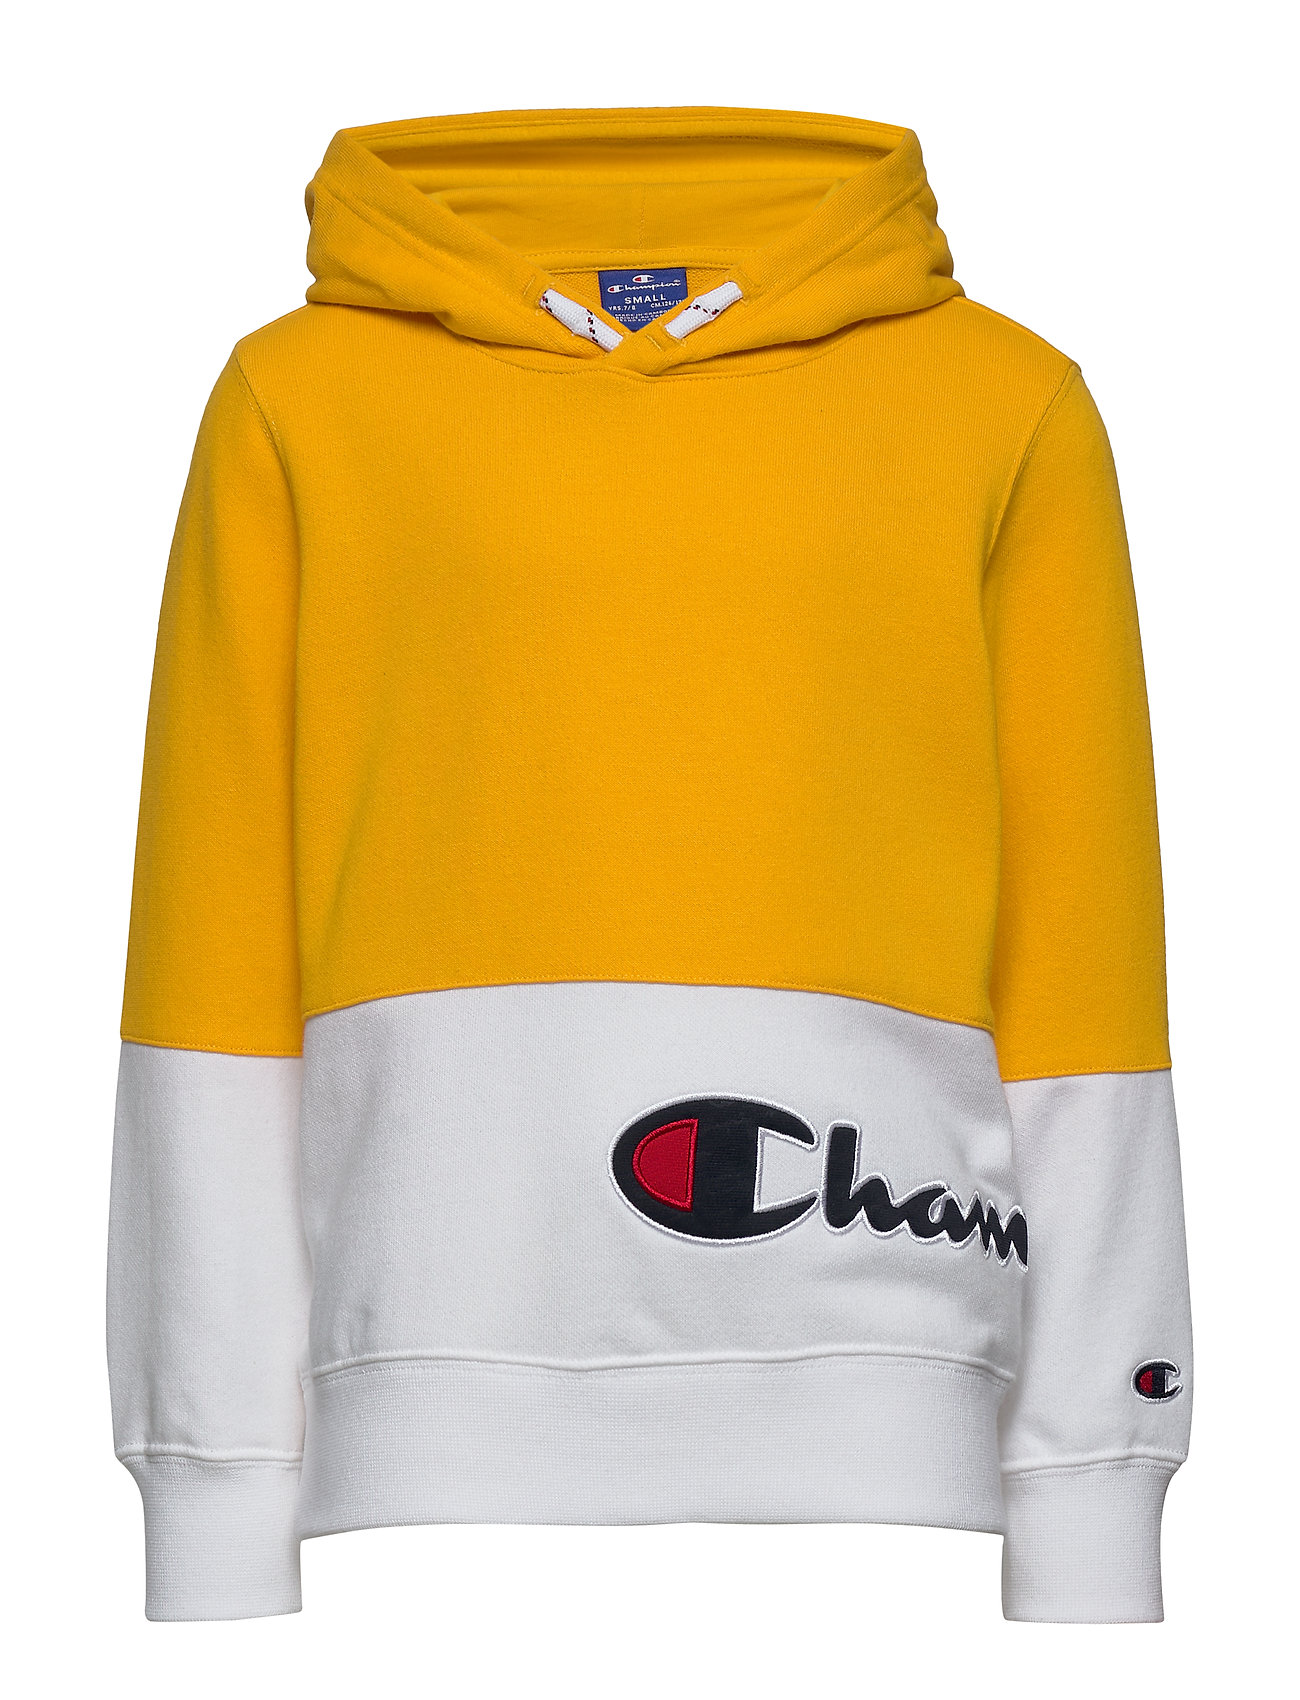 champion hooded sweater